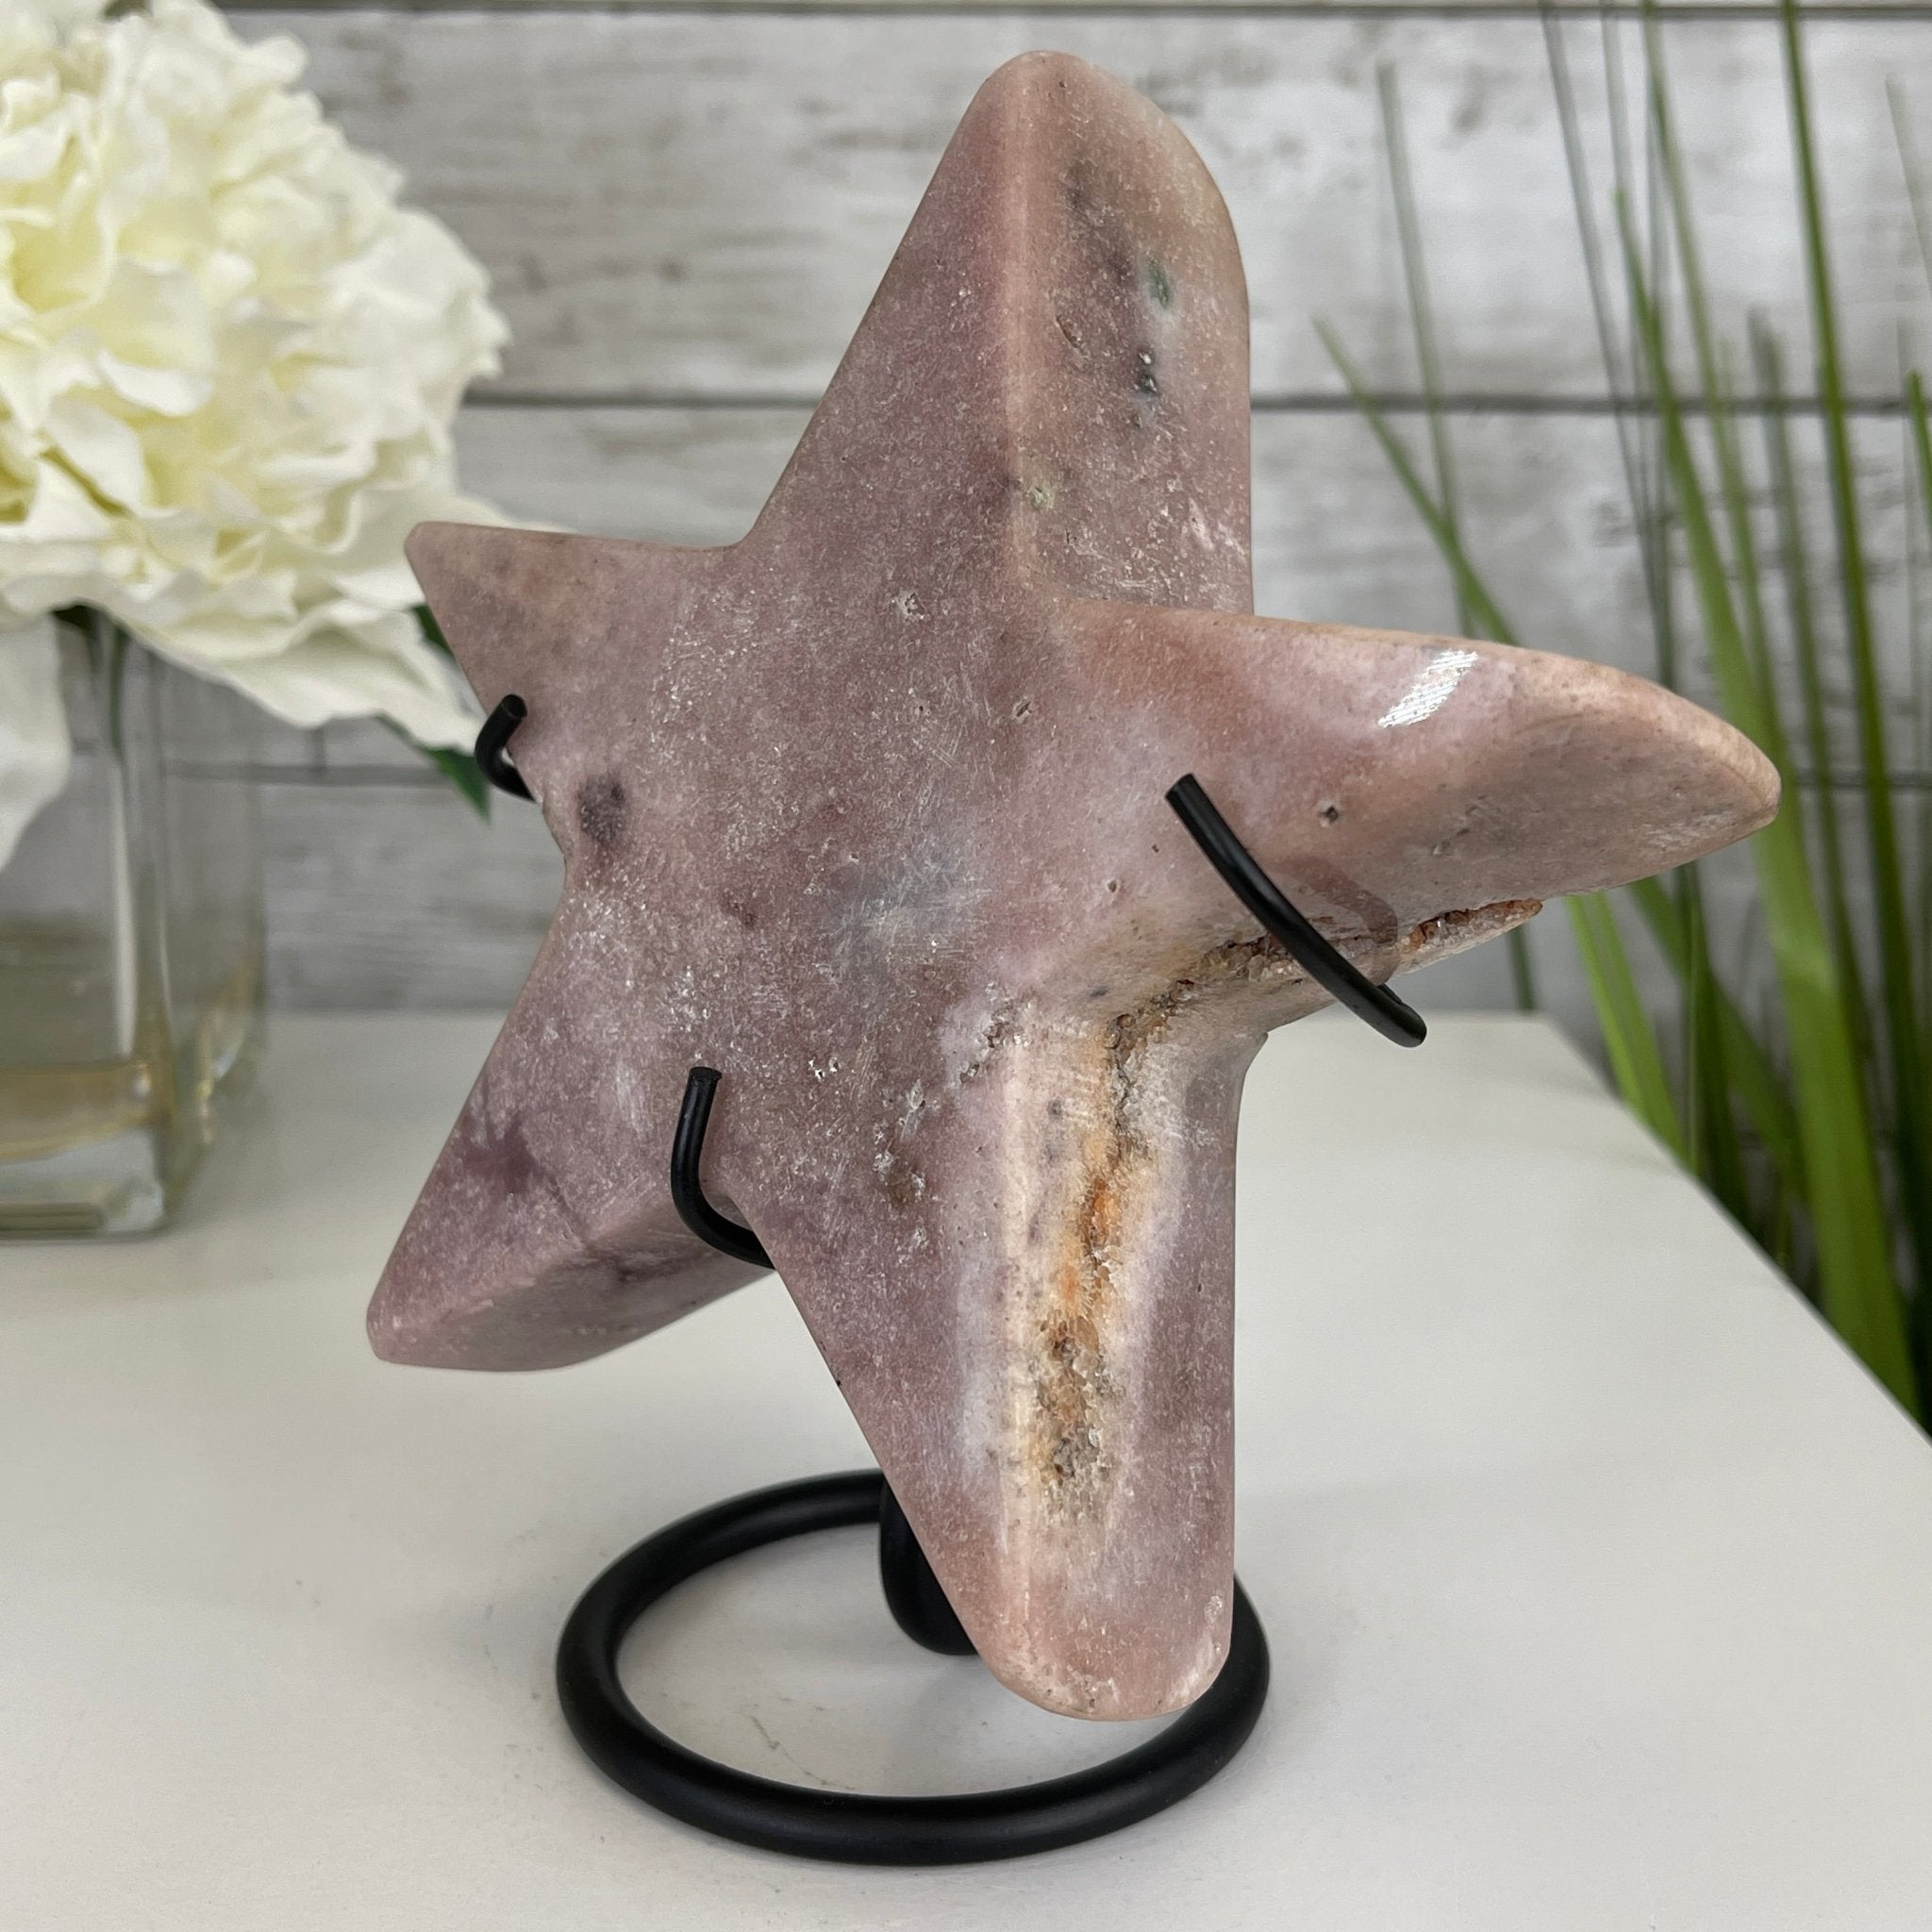 Pink Amethyst Star on a Metal Stand 6.75" Tall #5746-0010 by Brazil Gems - Brazil GemsBrazil GemsPink Amethyst Star on a Metal Stand 6.75" Tall #5746-0010 by Brazil GemsStars5746-0010